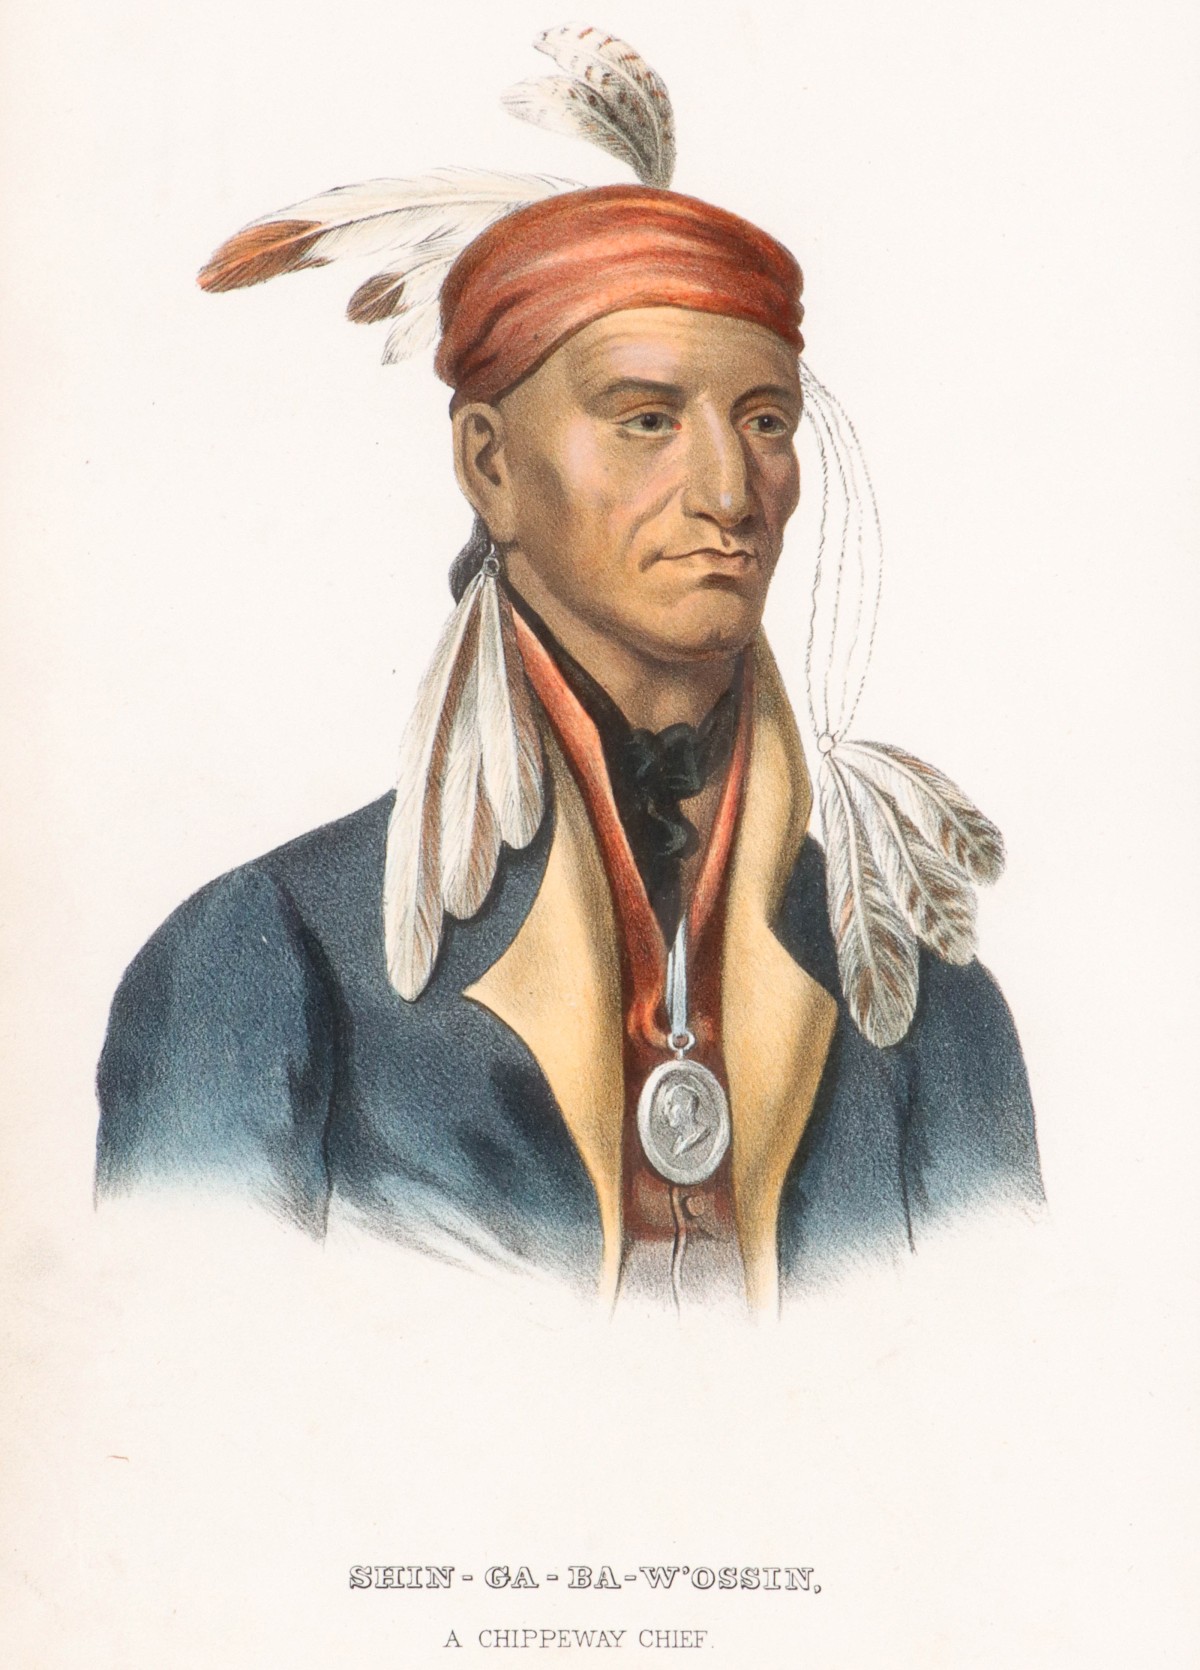 J.T. BOWEN HAND COLORED LITHOGRAPH 'CHIPPEWAY CHIEF'